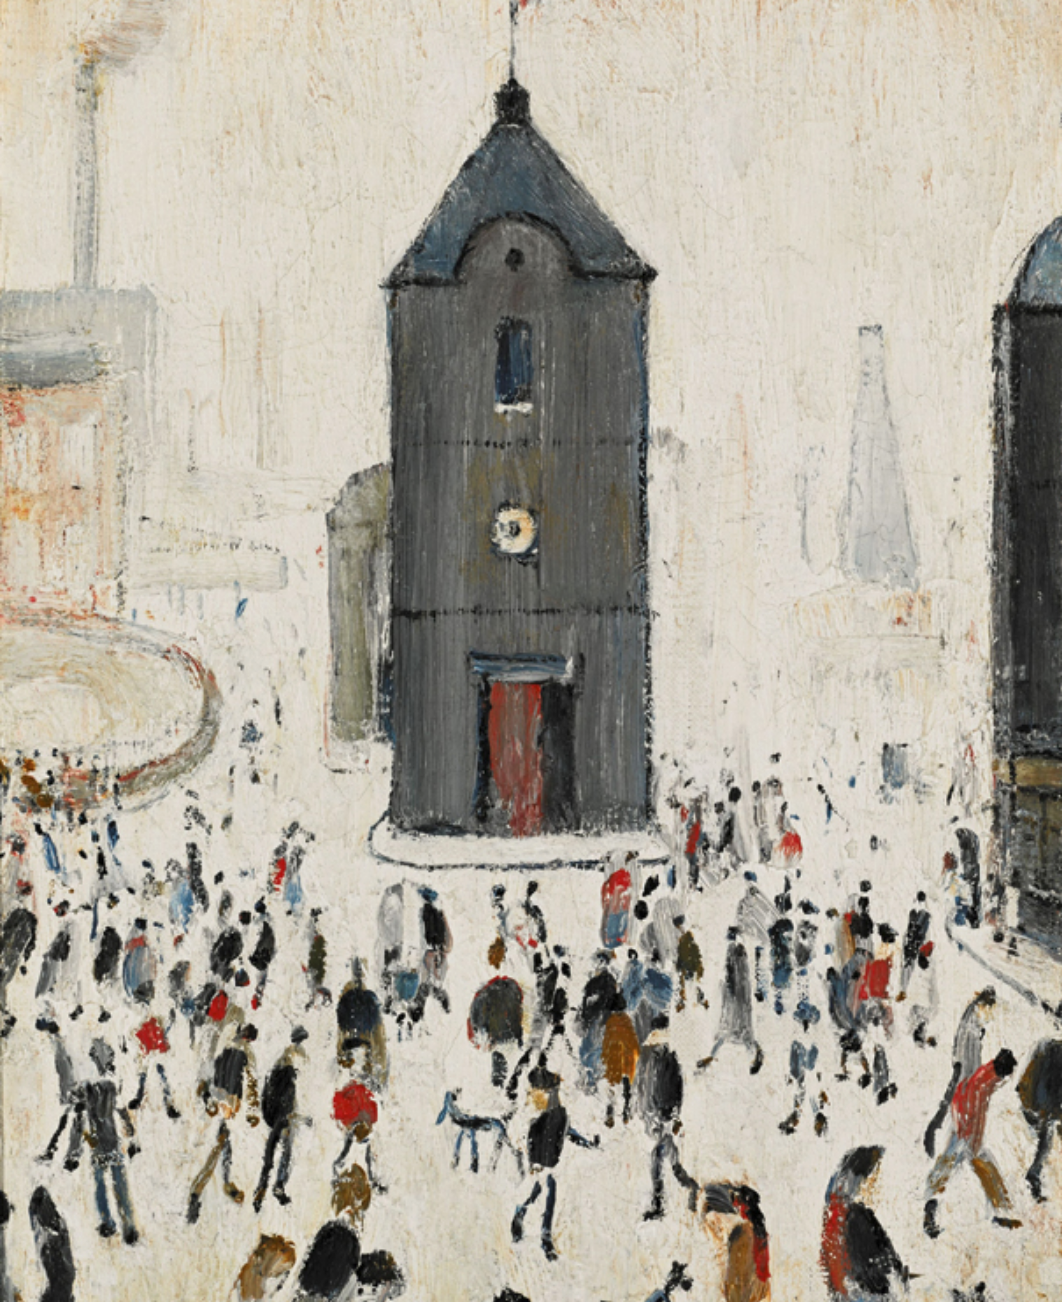 The Black Church (1964) by Laurence Stephen Lowry (1887 - 1976), English artist.